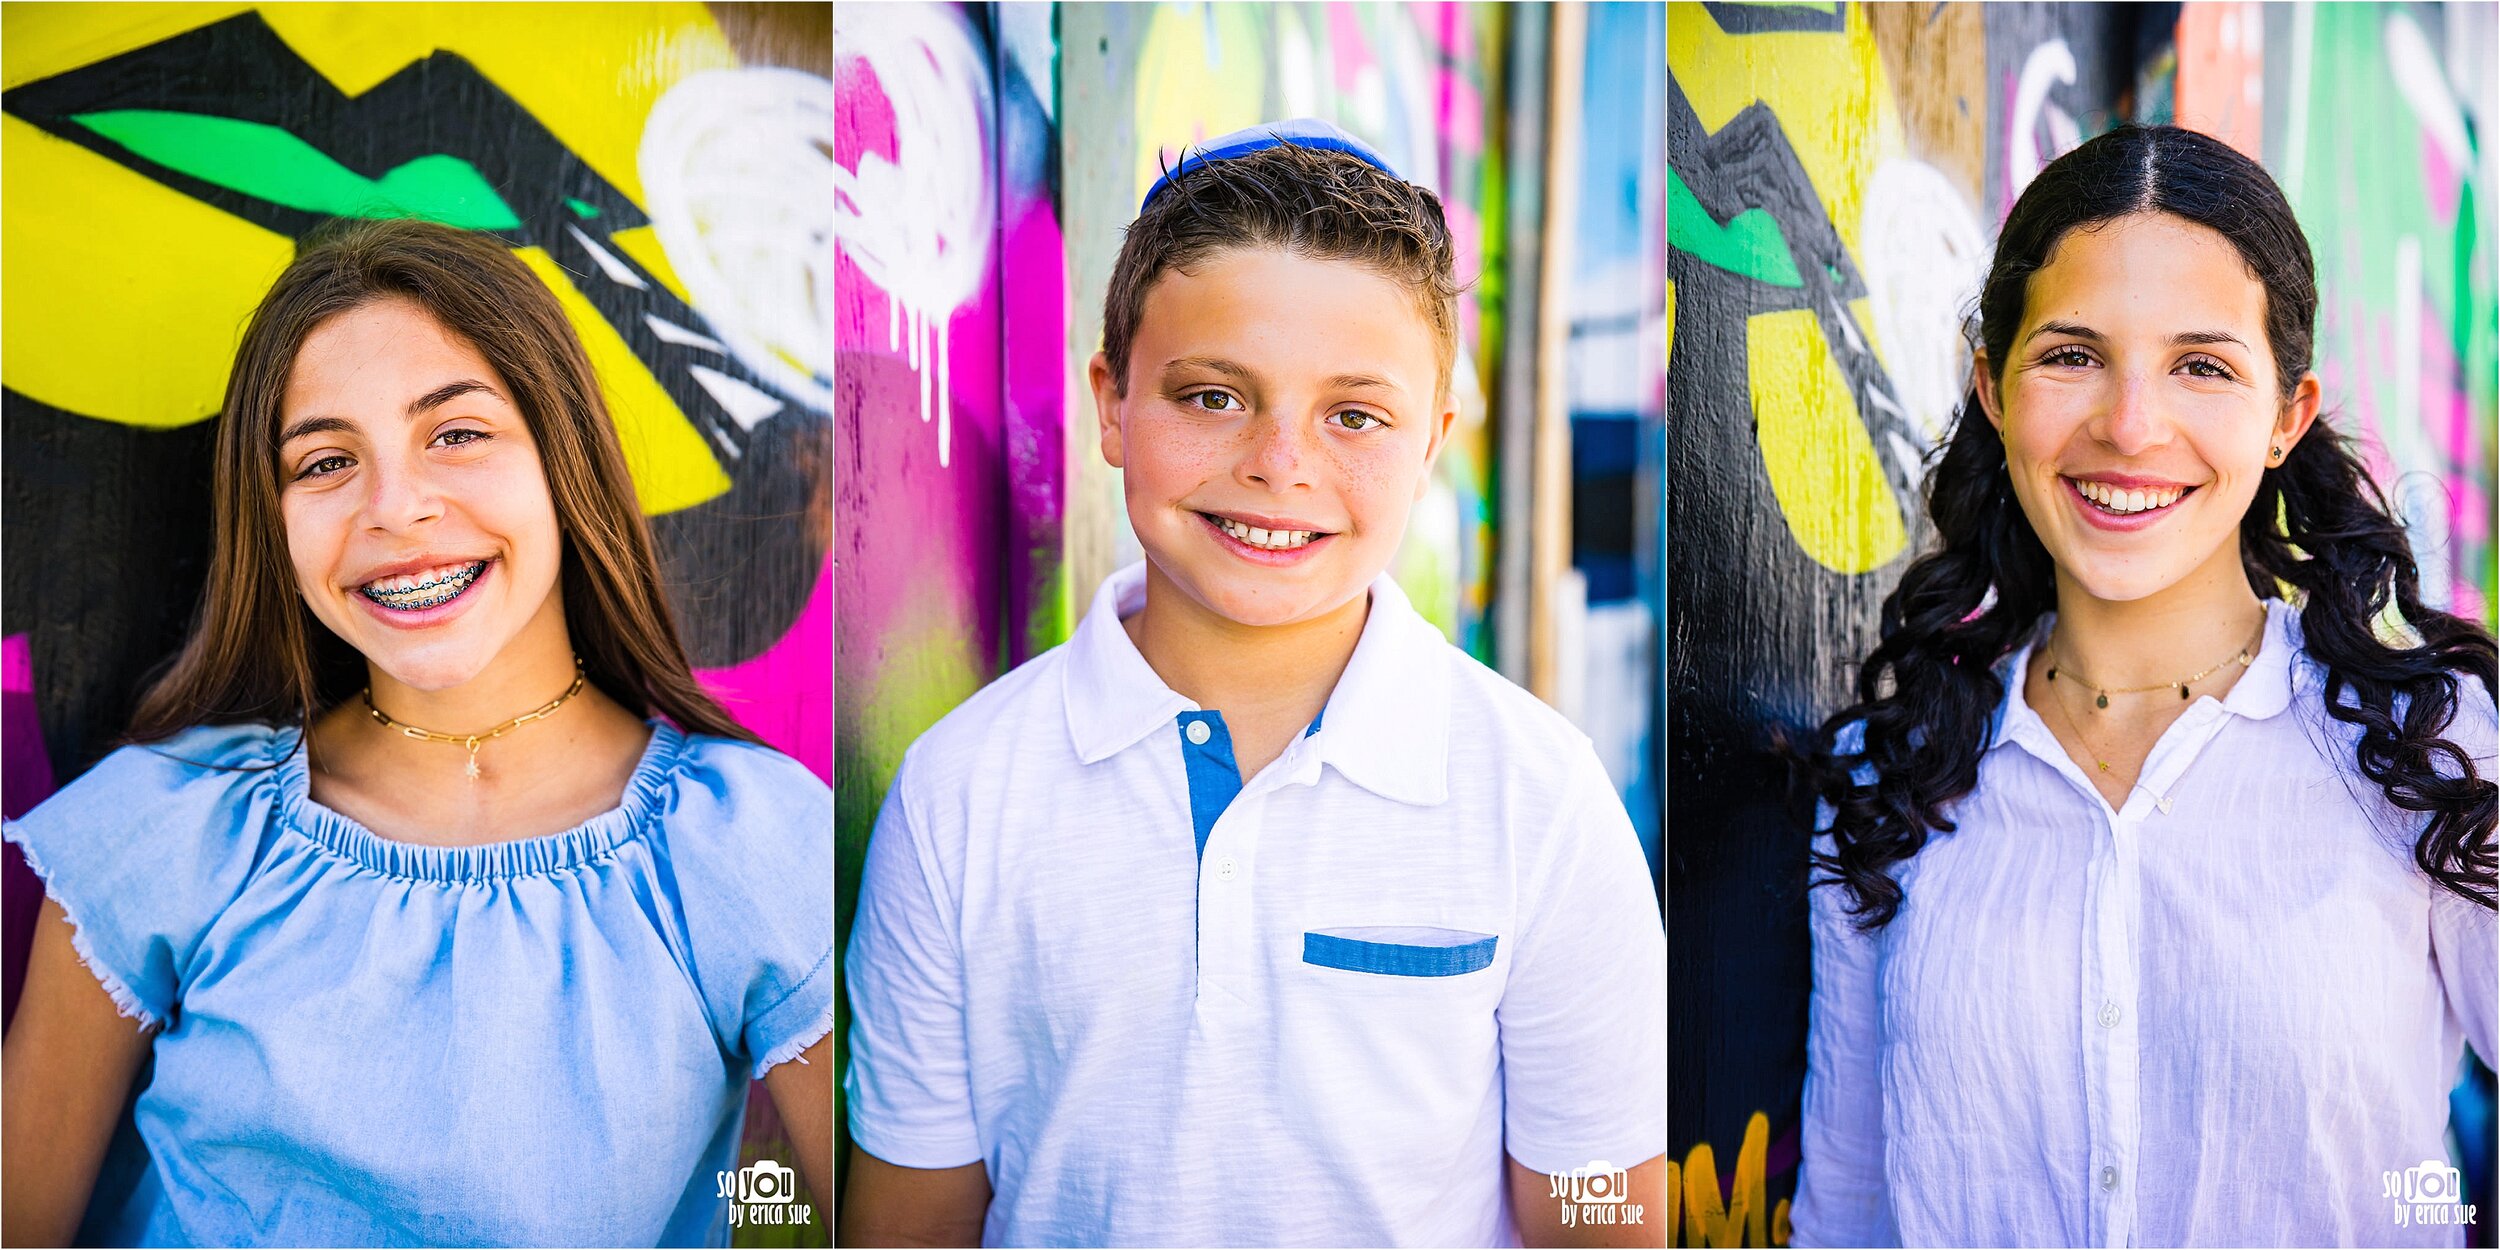 22-so-you-by-erica-sue-extended-family-session-wynwood-lifestyle-photographer-CD8A7846 (2).jpg